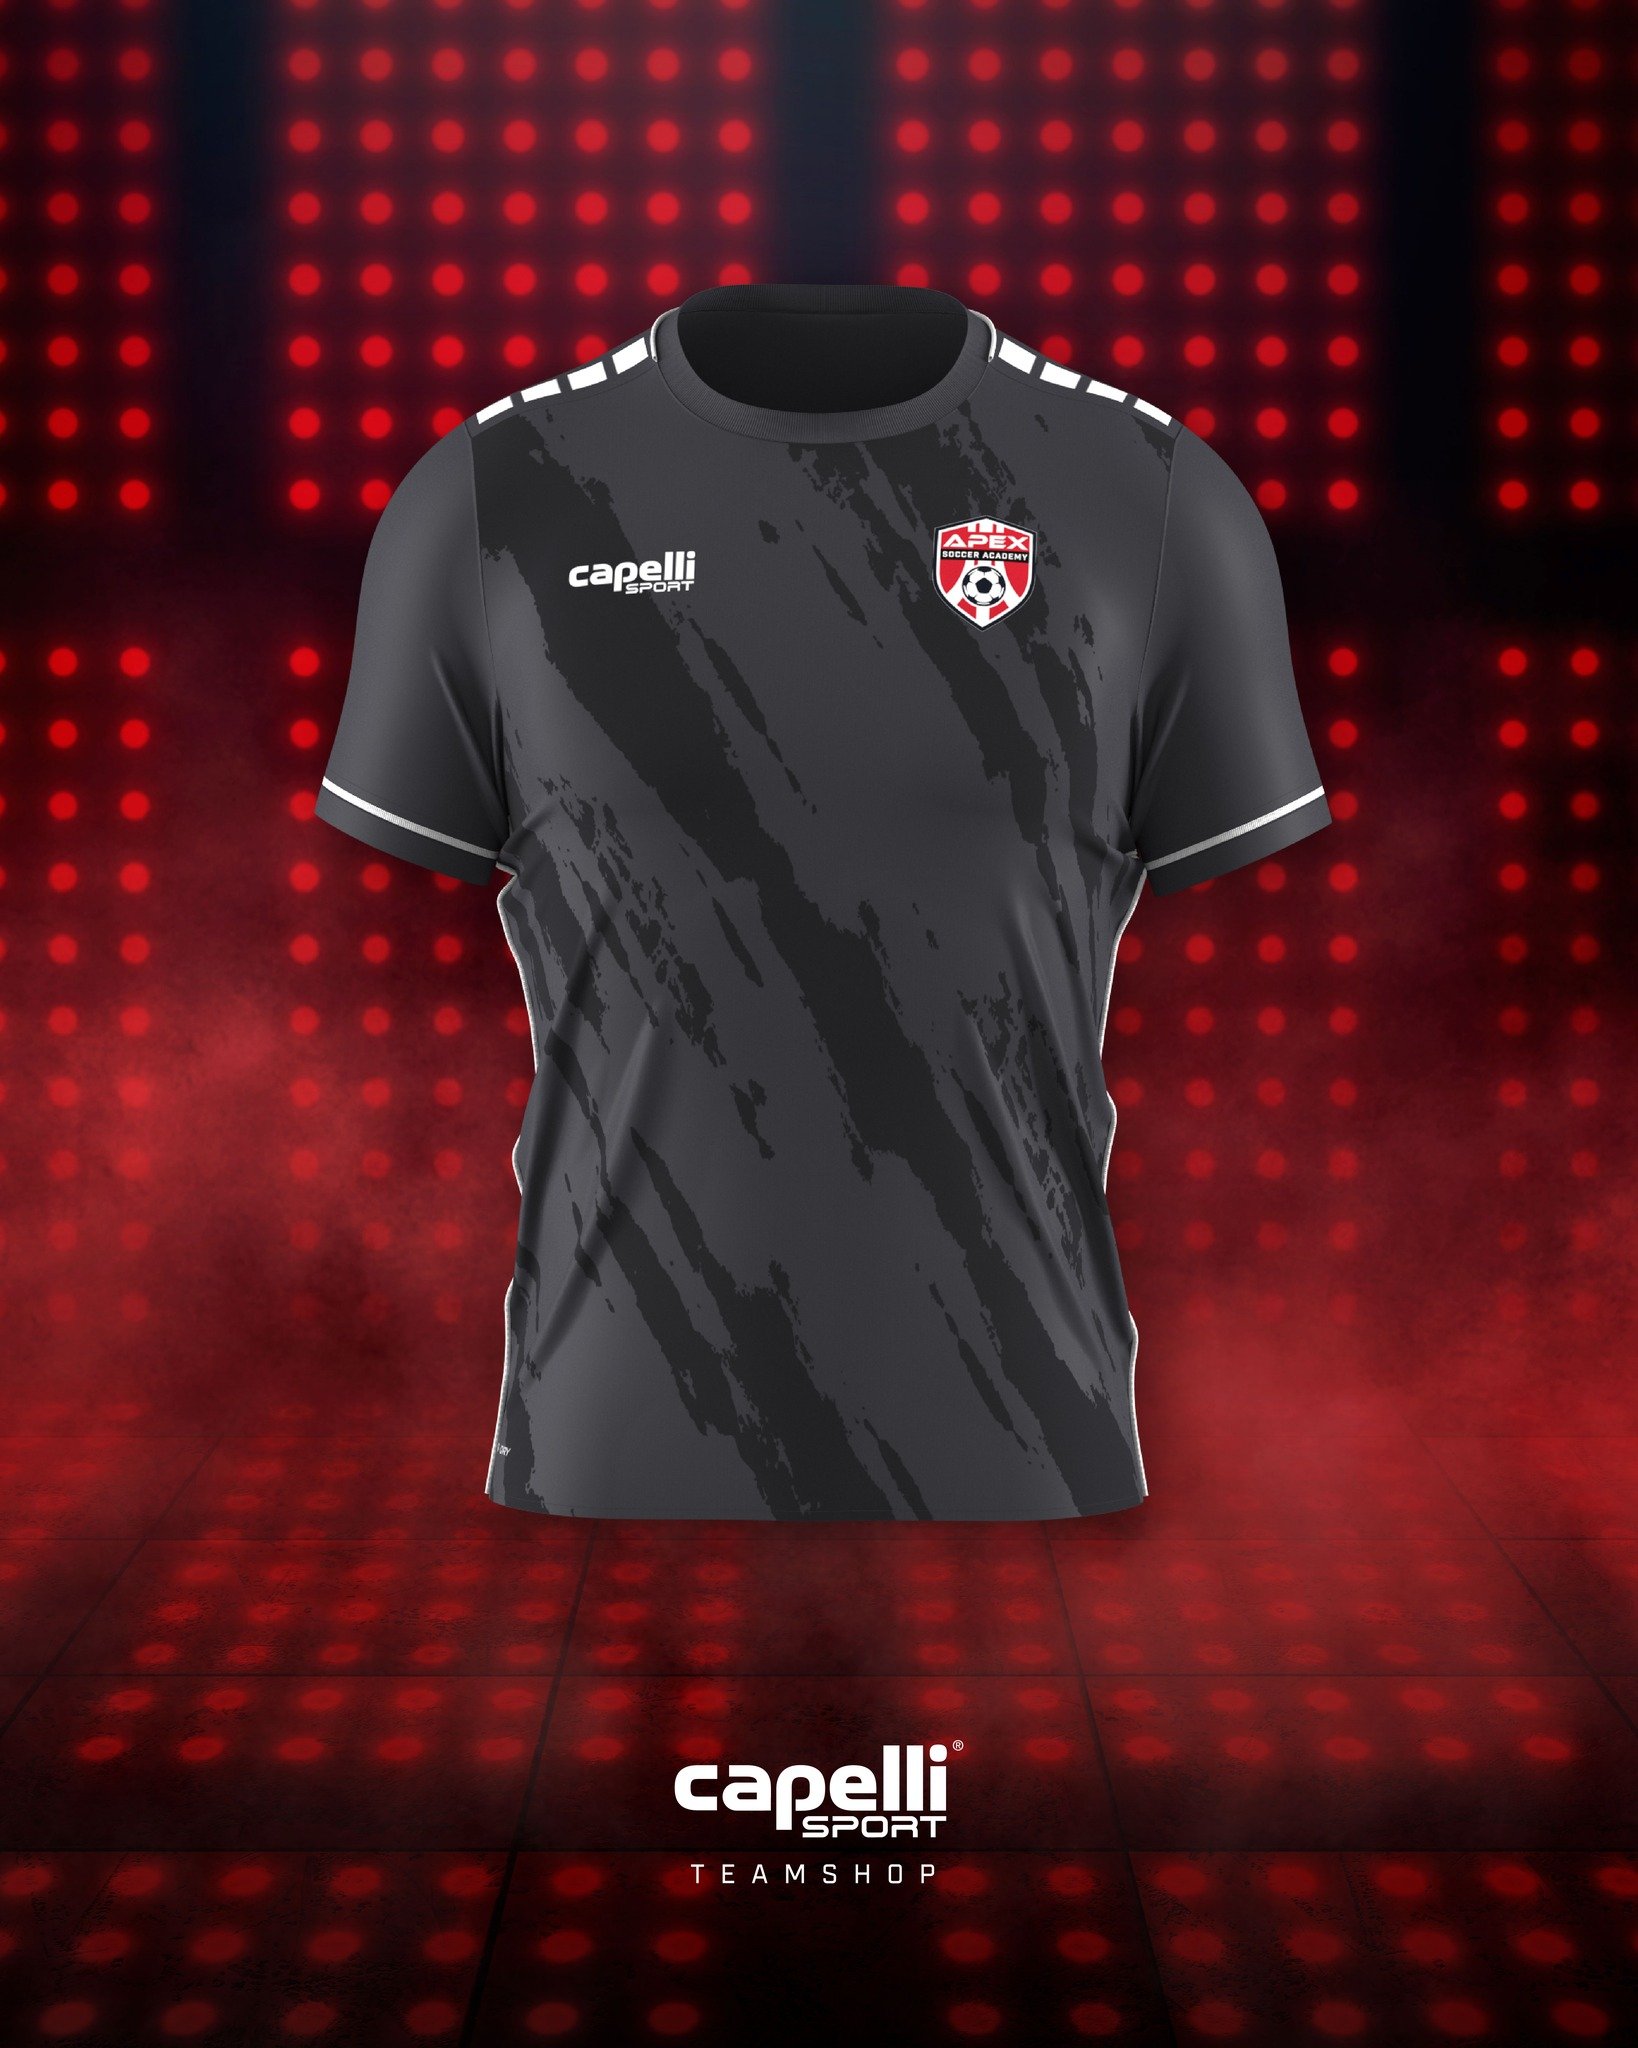 👀👀 The New Capelli uniforms for the upcoming 2024/25 season are looking 🔥🔥

Can't wait to be rocking these come the new season!

#newlook #apexsoccer 

@capellisport